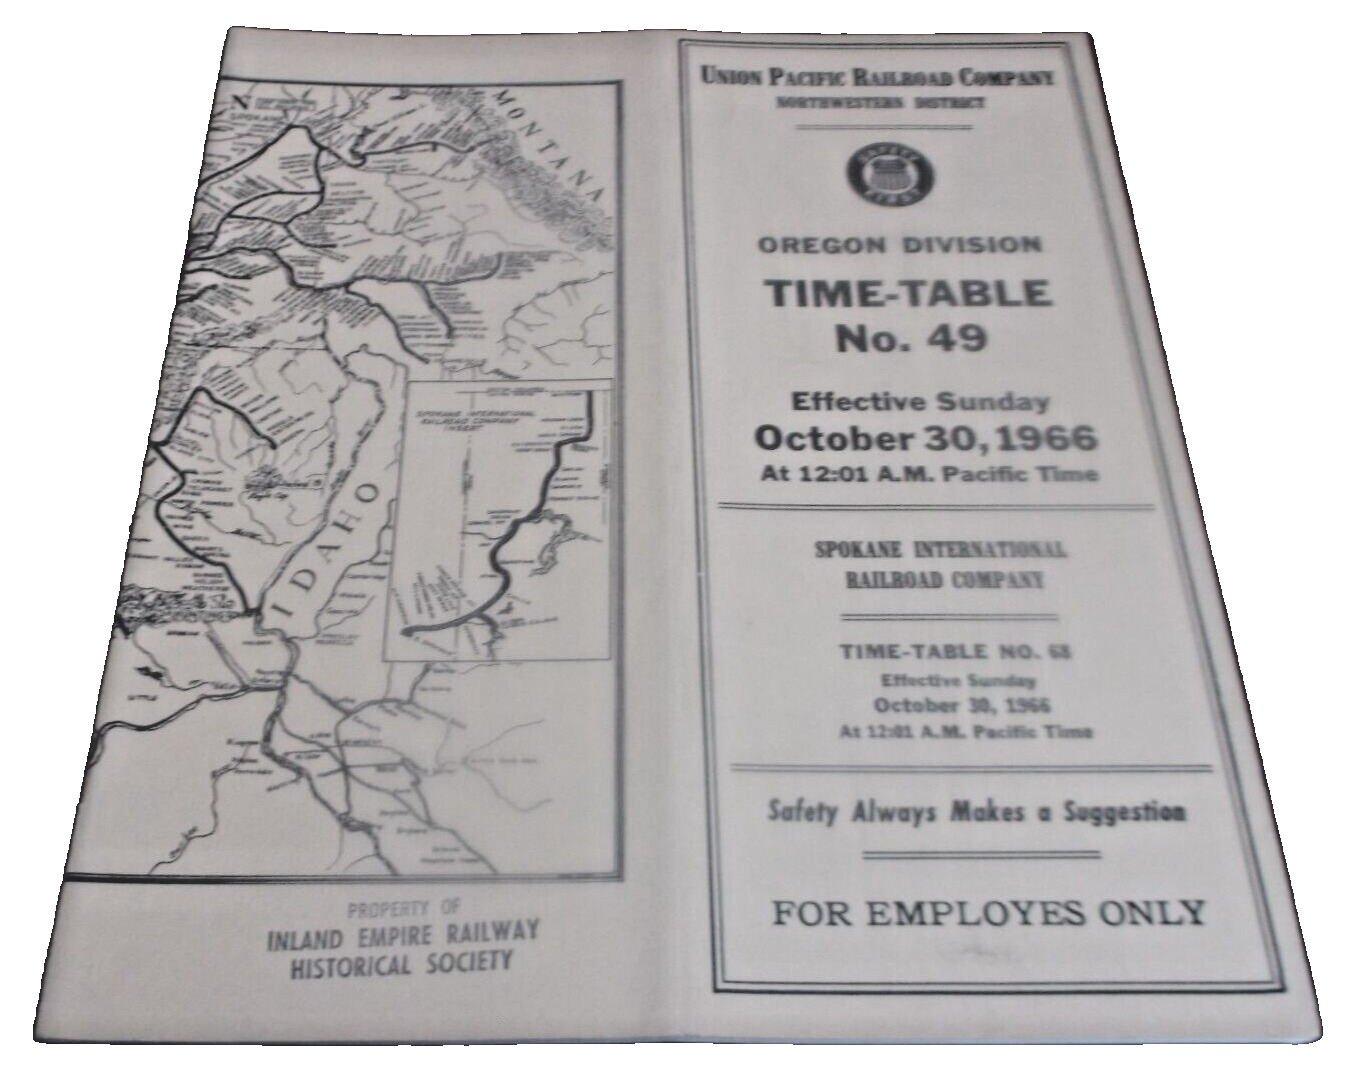 OCTOBER 1966 UNION PACIFIC OREGON DIVISION EMPLOYEE TIMETABLE #49